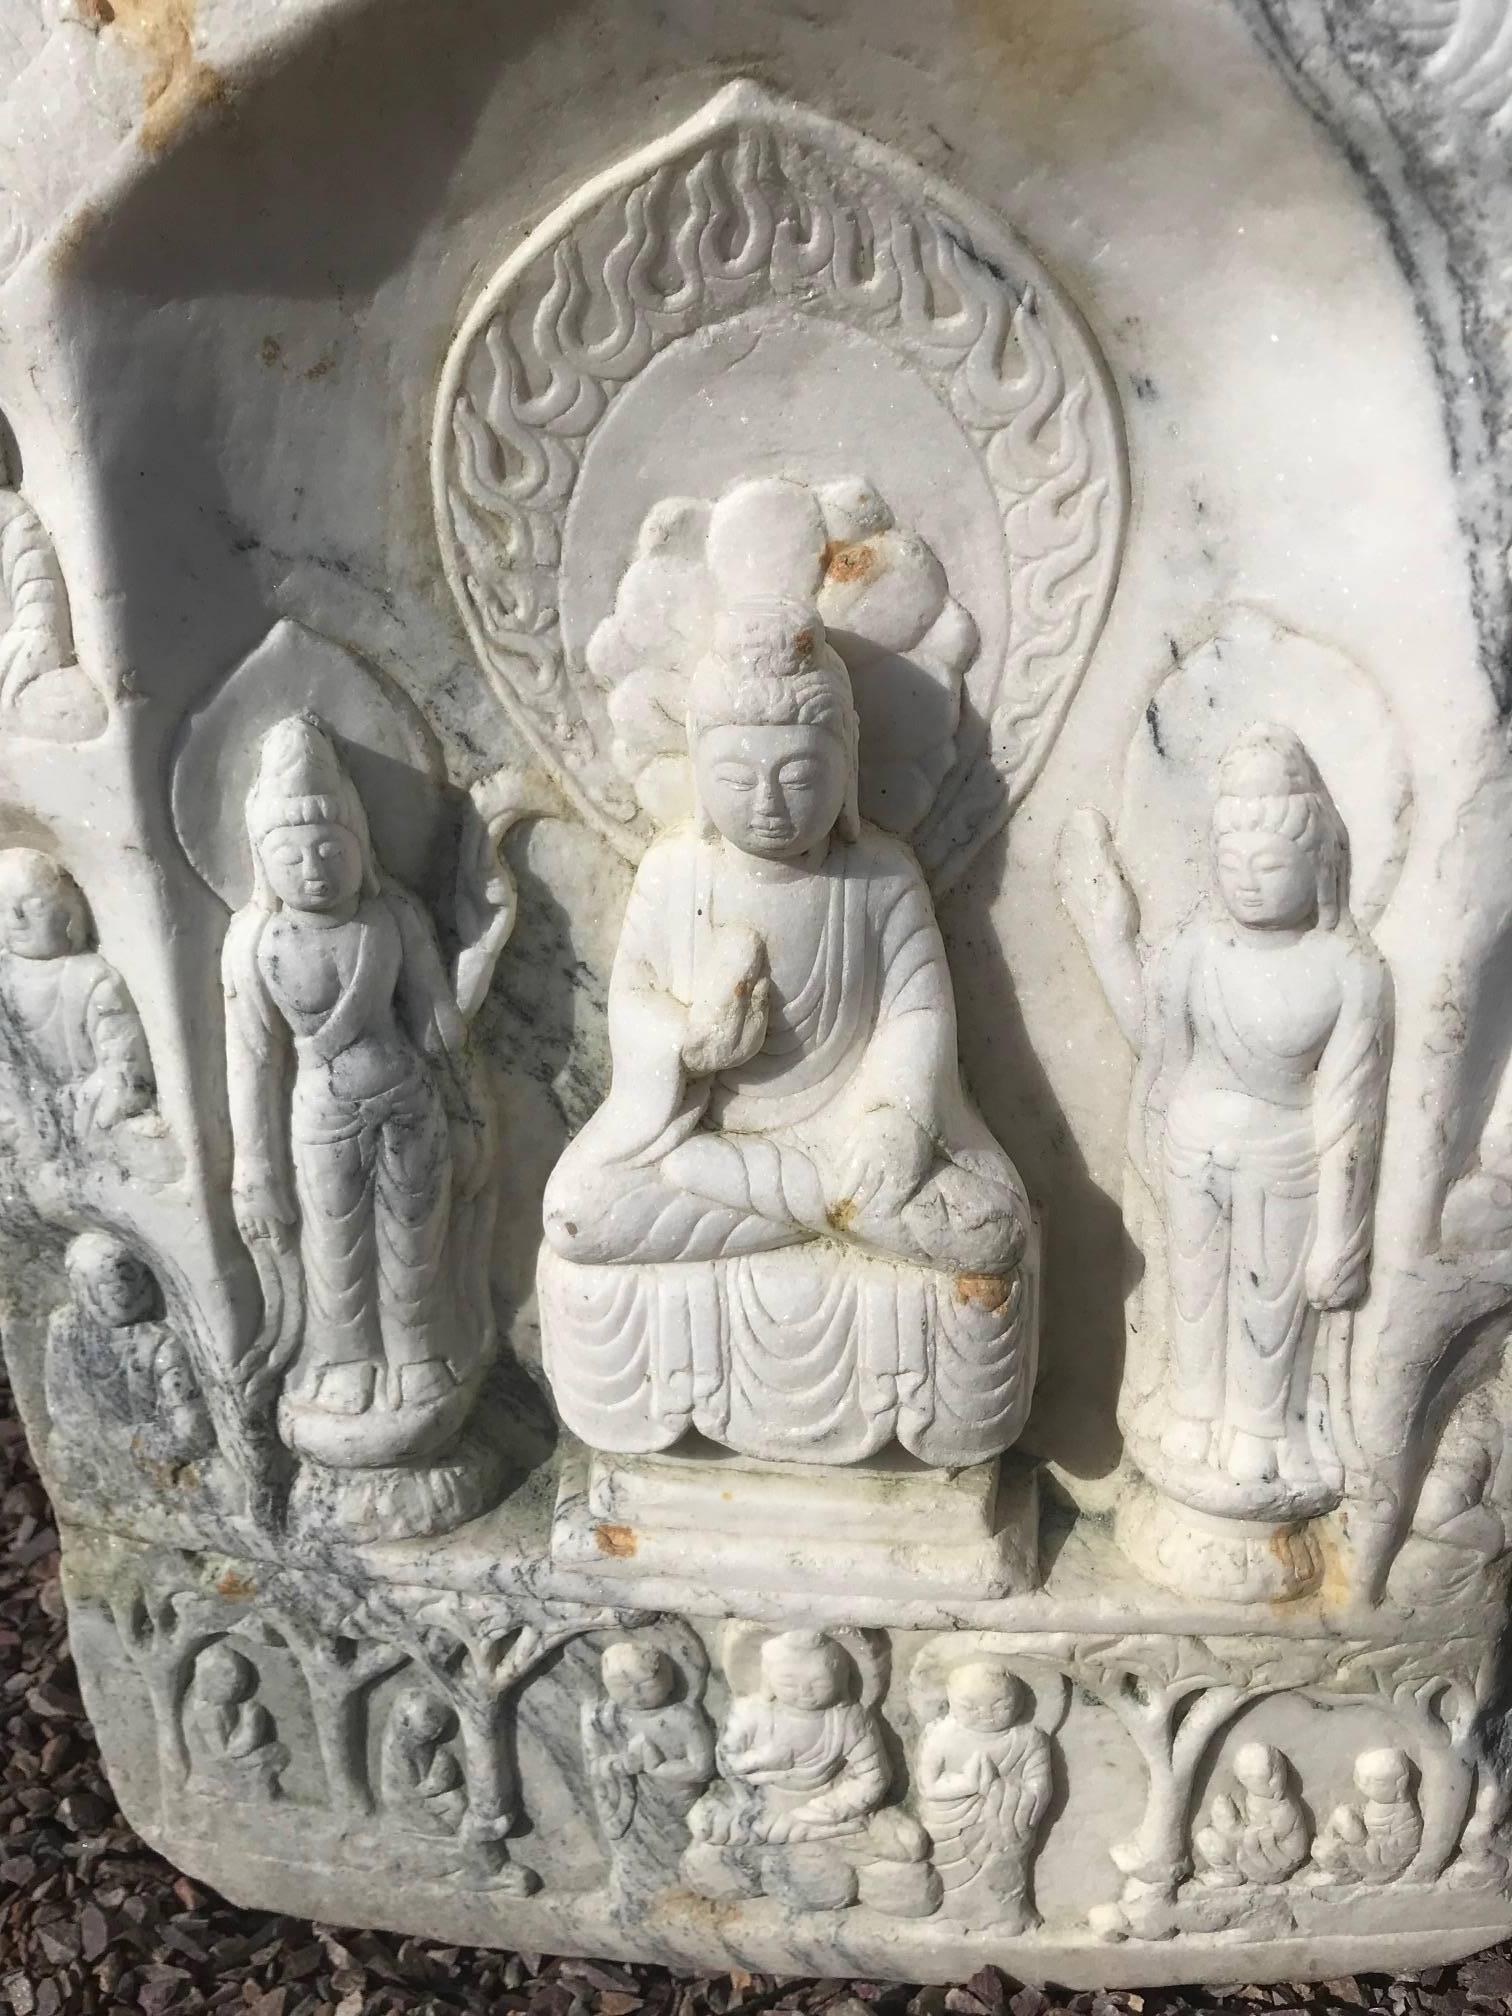 A breathtaking example.

This beautiful Buddha sculpture will bring serenity and timeless style to your home, office, sacred space, or garden

This older hand-carved marble sculpture comes from a 50 year old Chinese antique stone collection formed